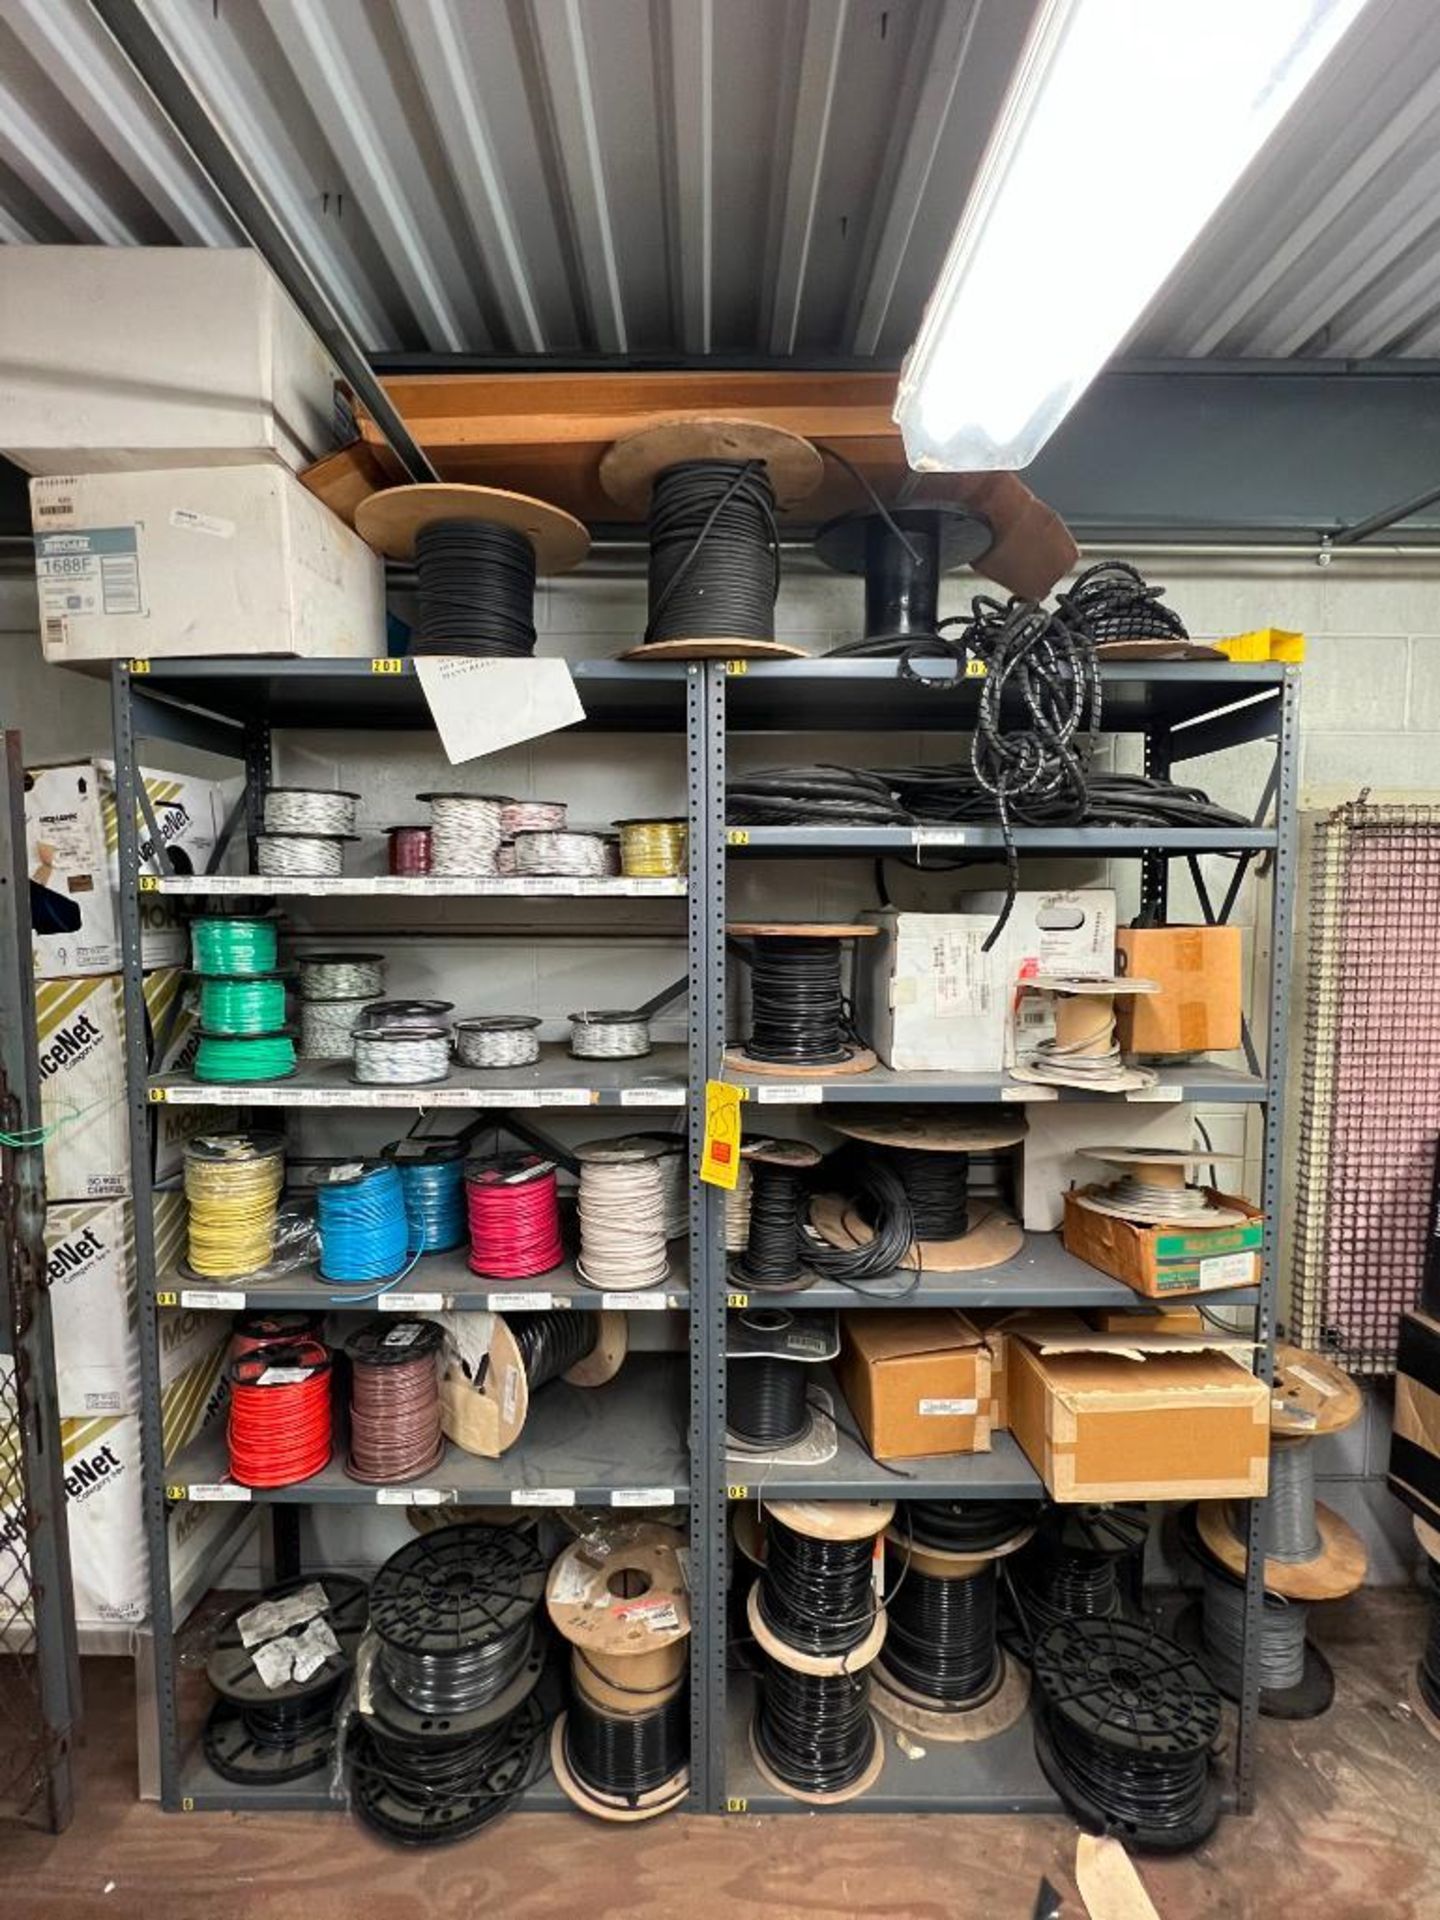 Section Parts Shelving, Dimensions = 74" x 36" - Rigging Fees: $250